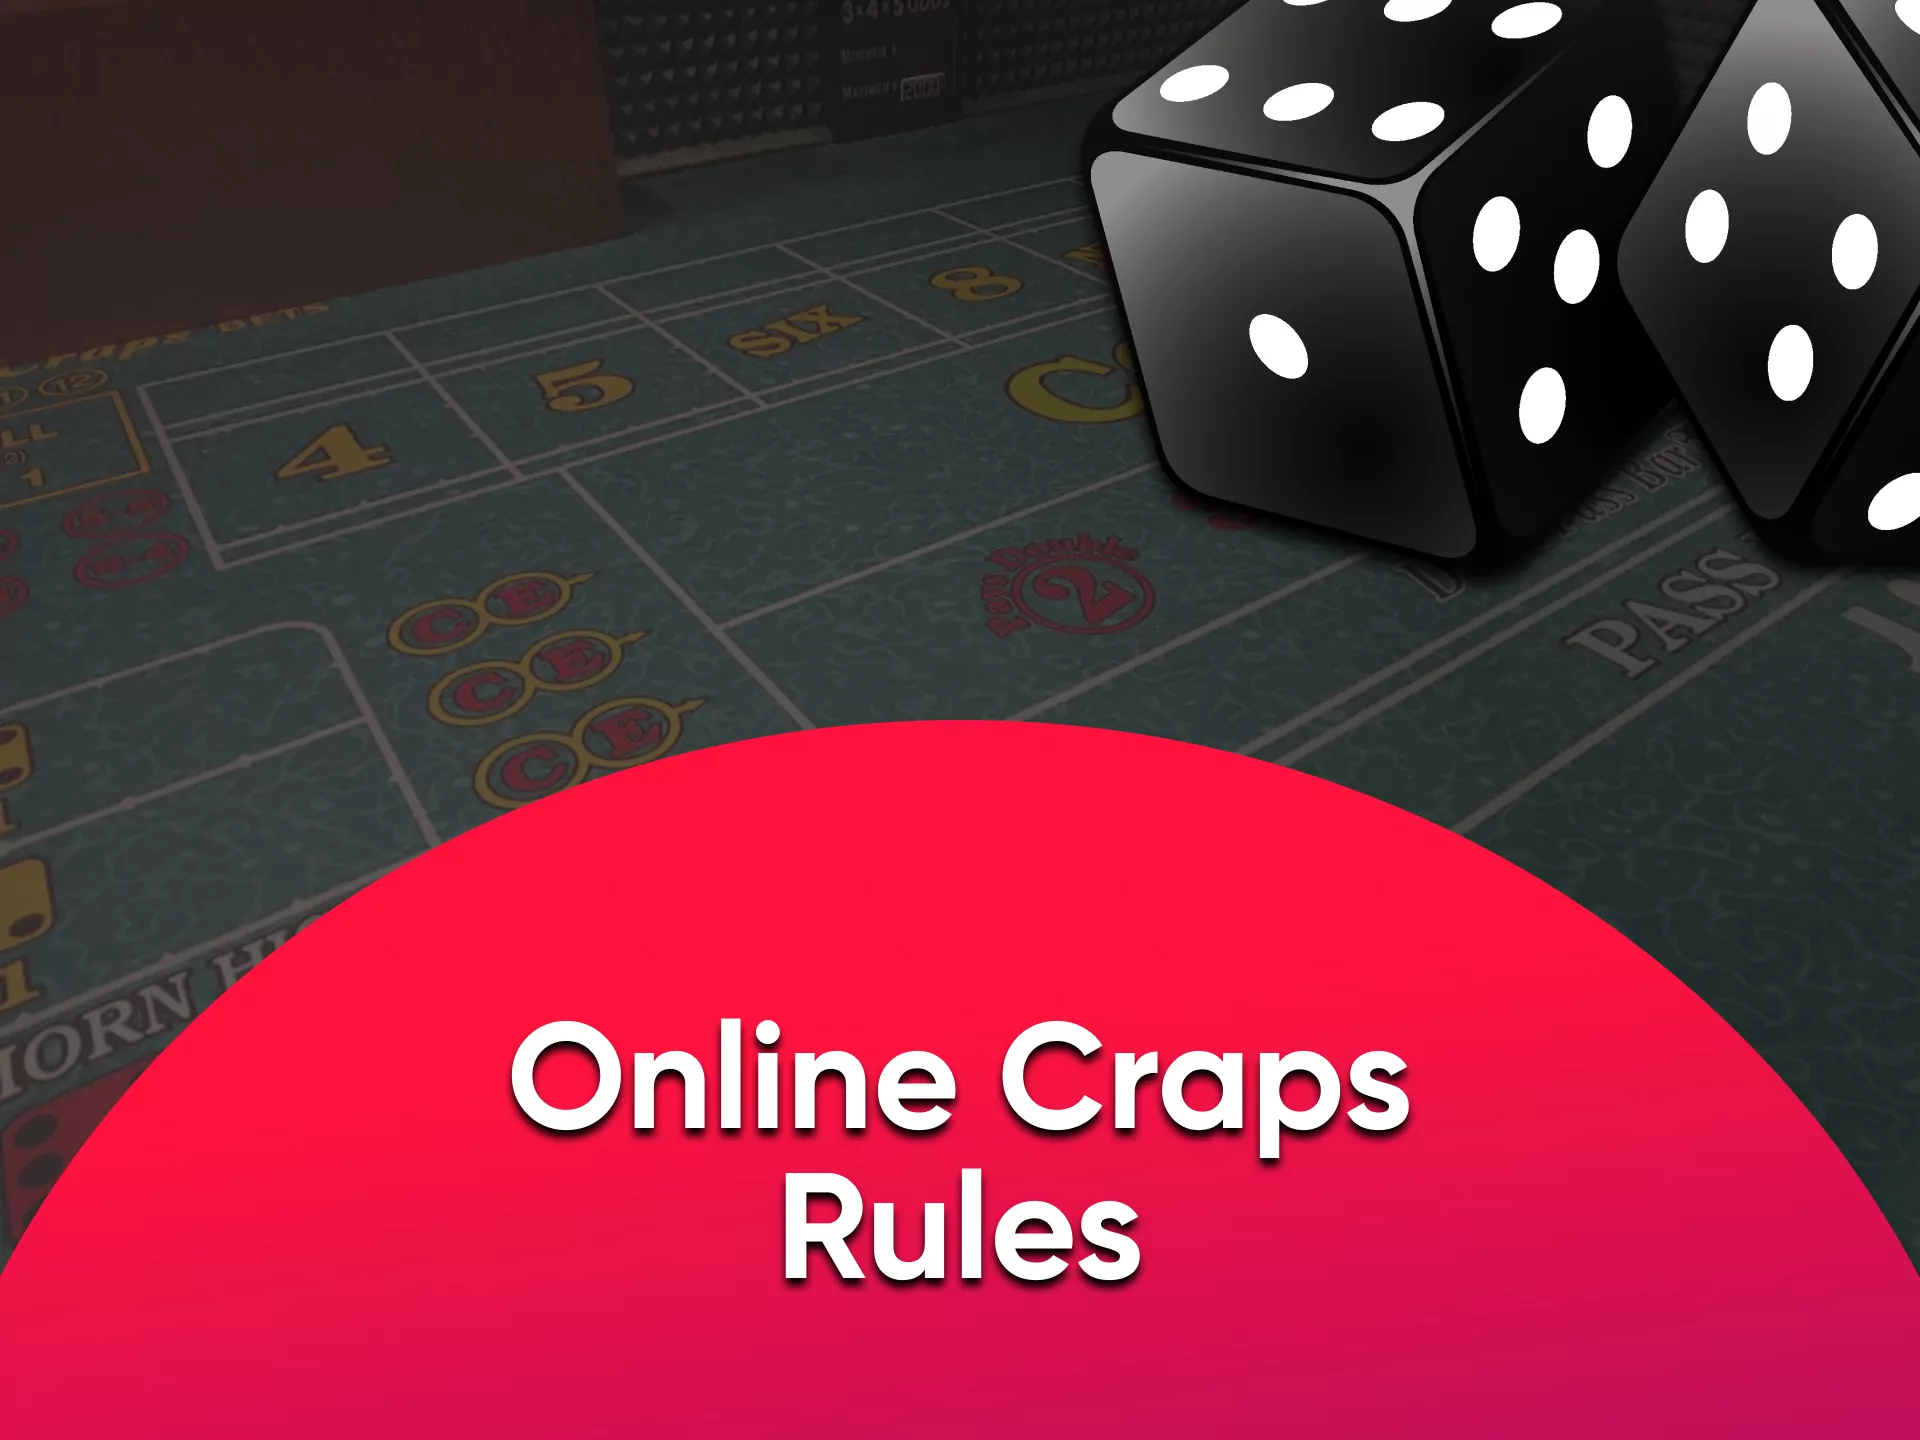 Learn the rules before playing Craps.